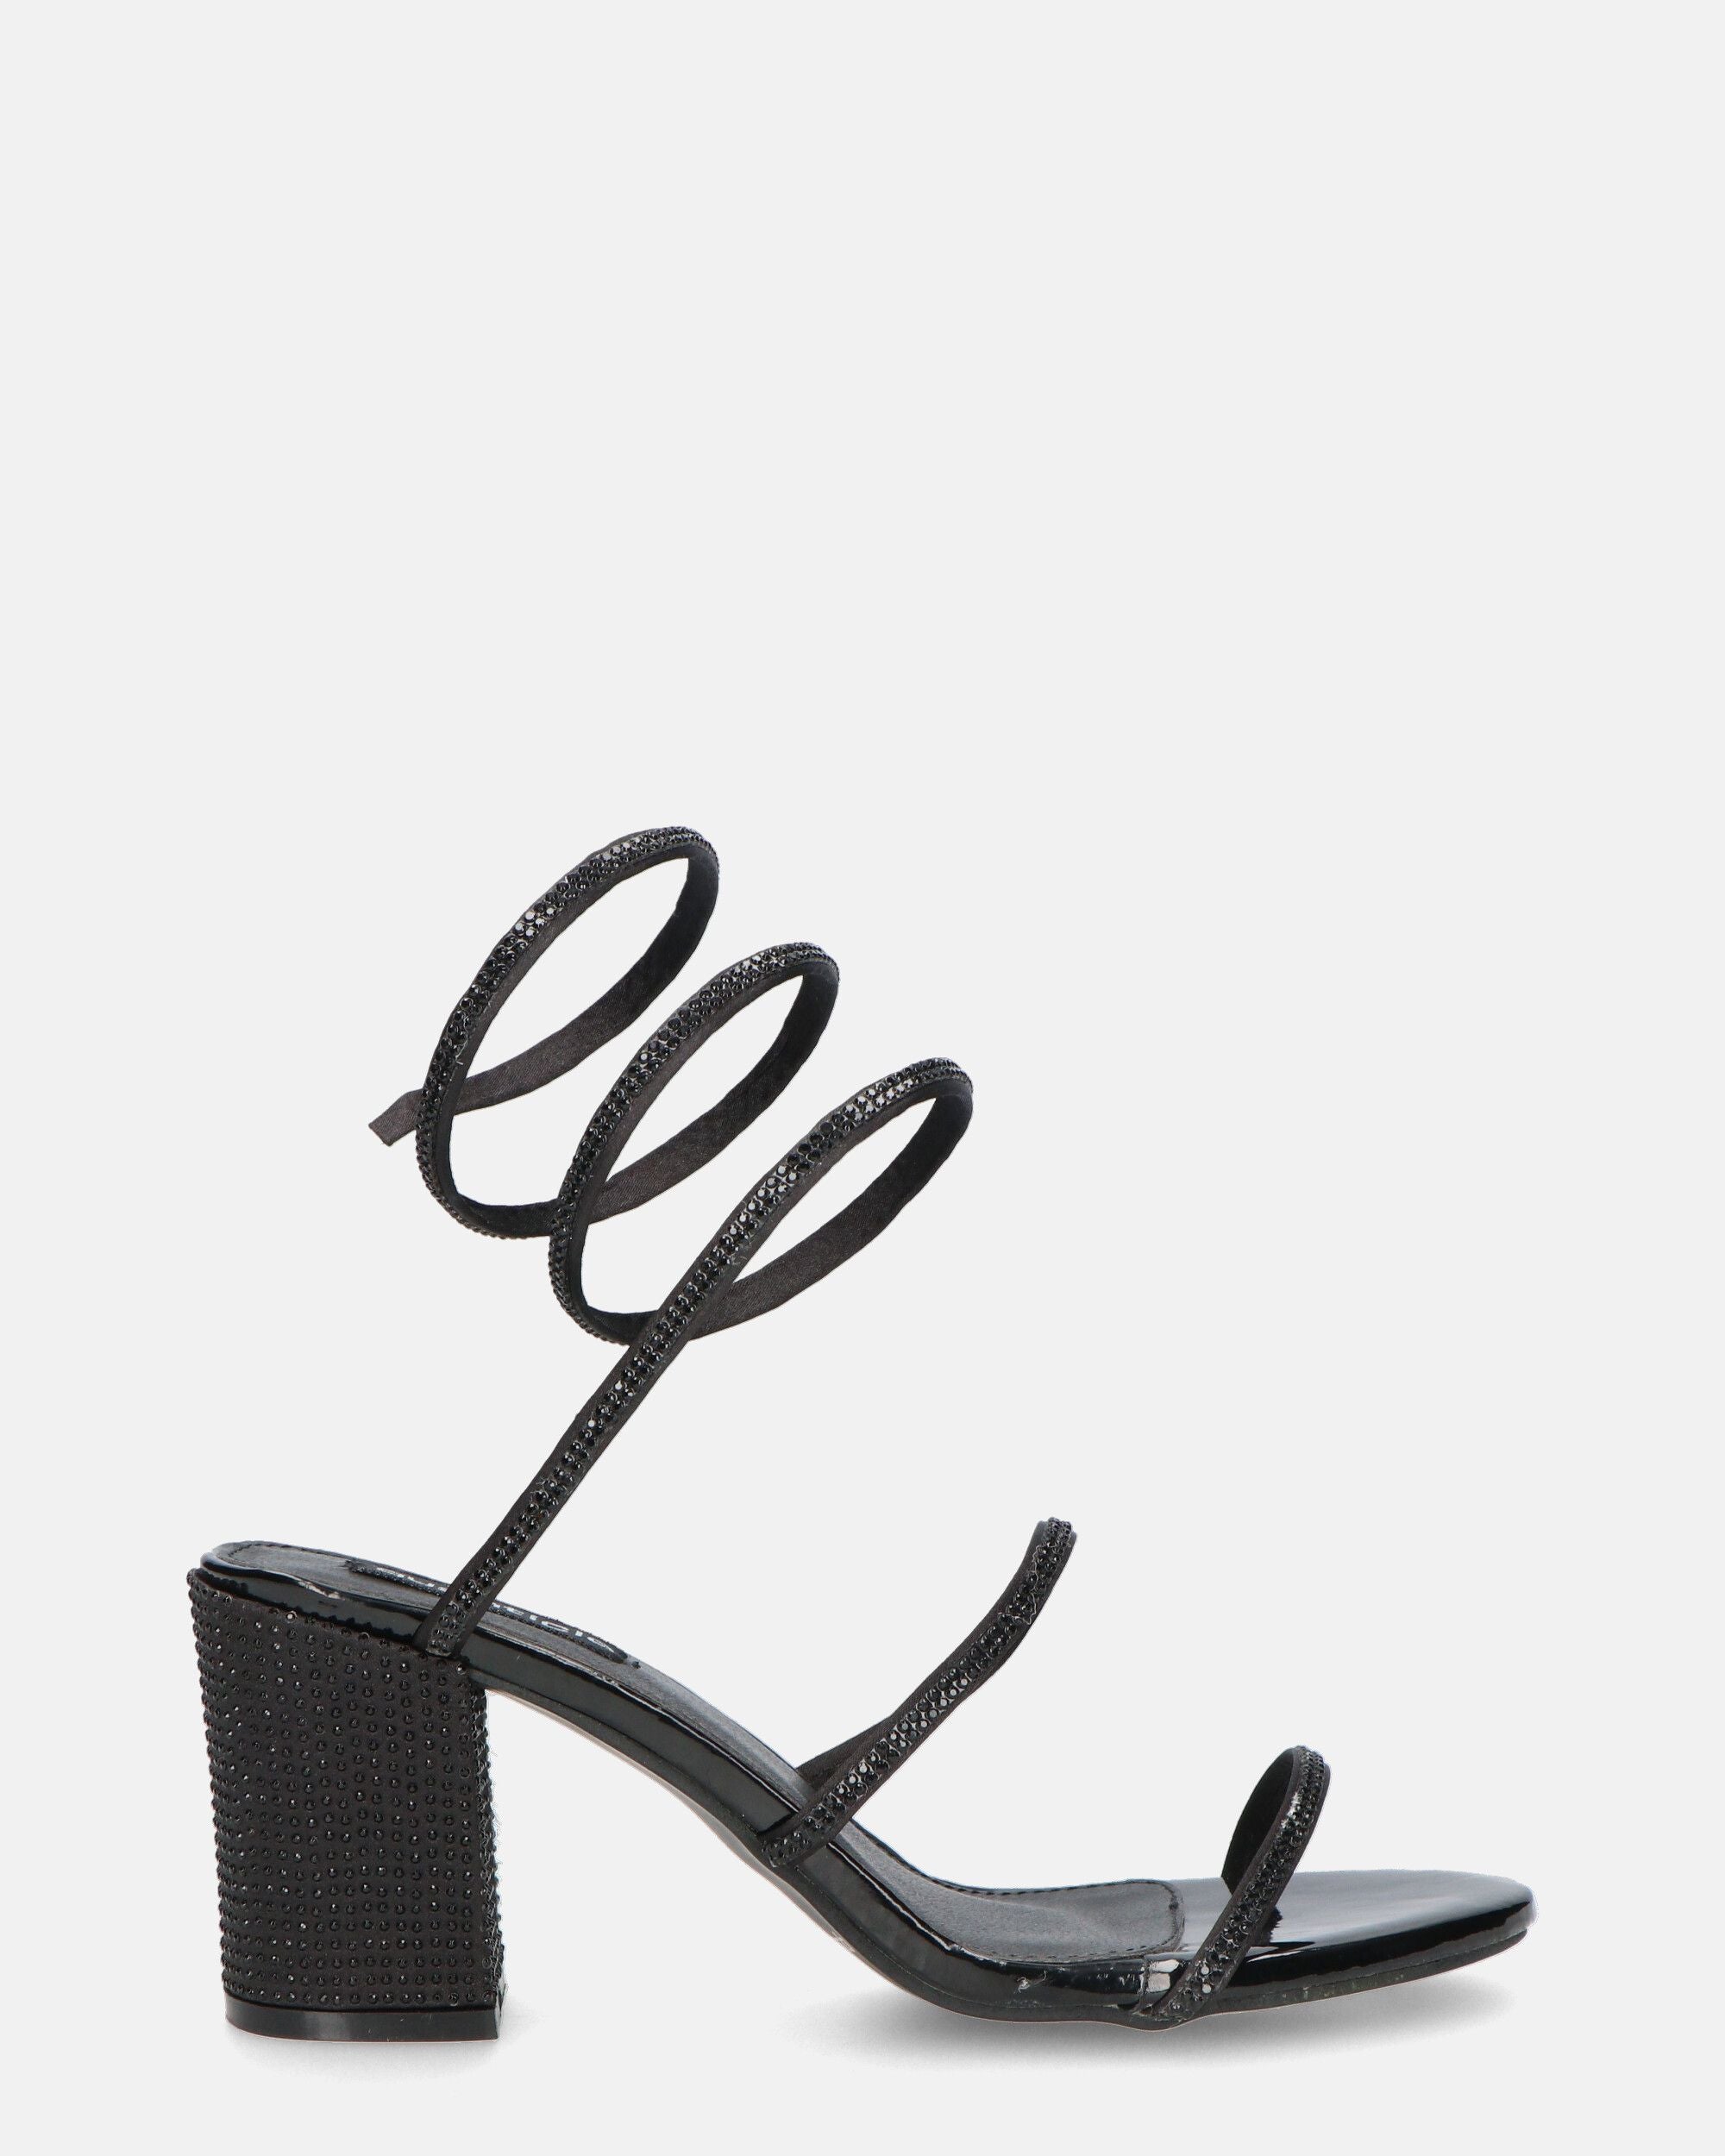 COBY - black high heels with gems and spiral